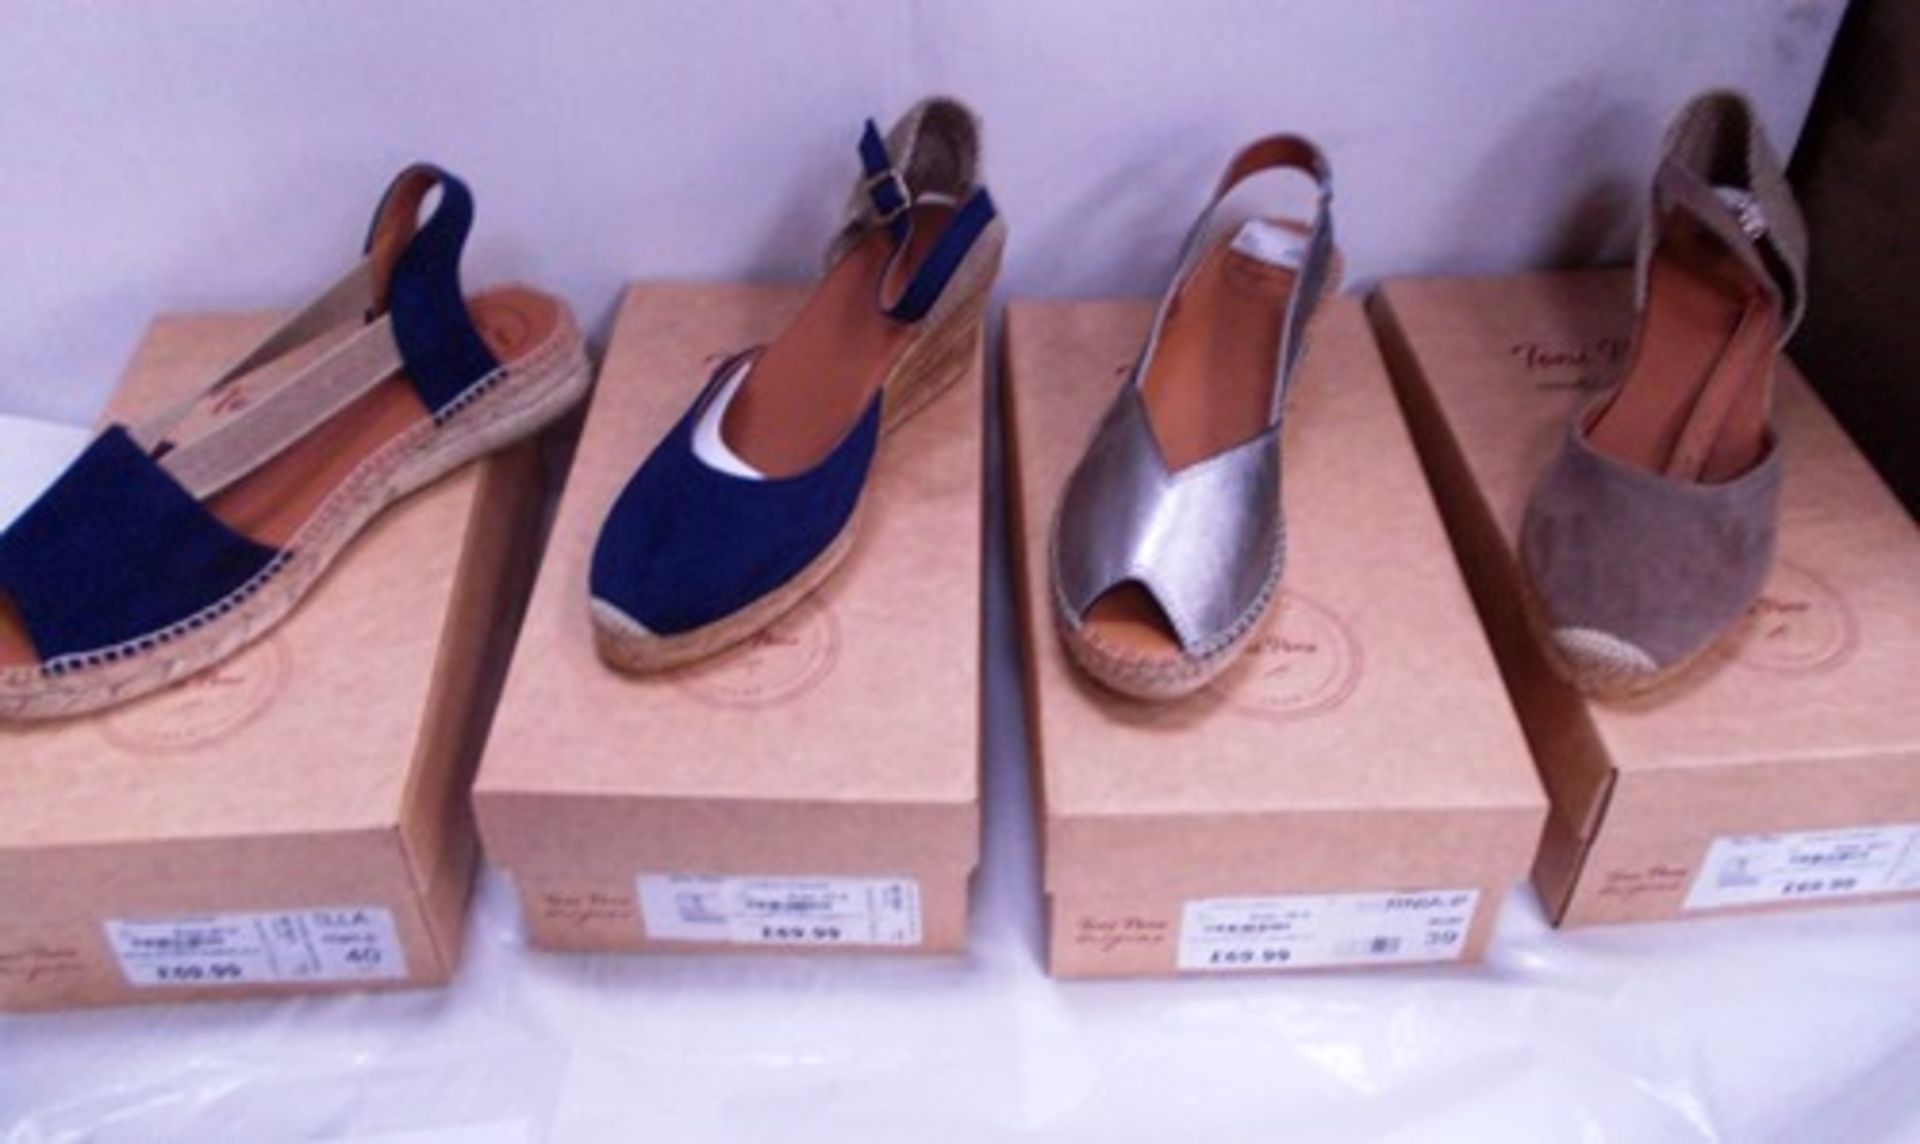 4 x pairs of Toni Pons ladies sandals in various styles, EU size 37, 38, 39 and 40 - New in box (